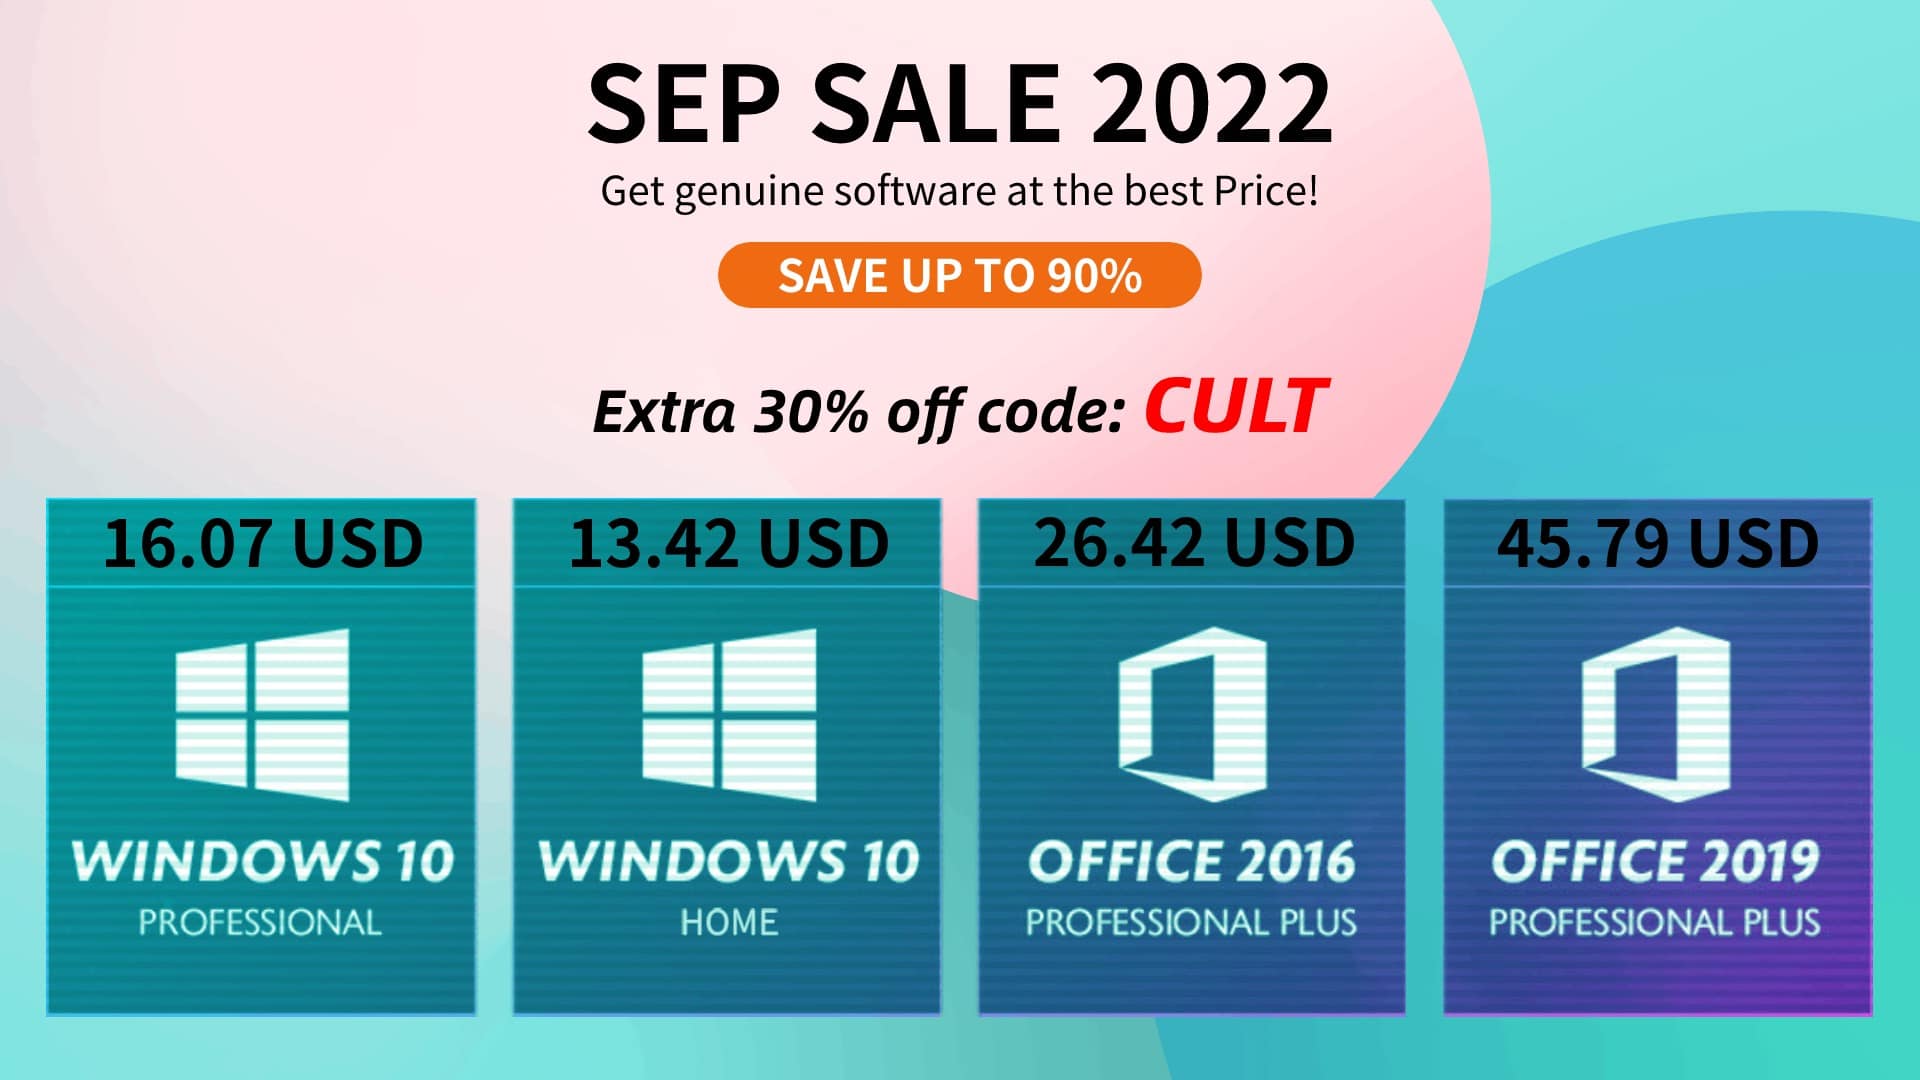 If you want to save money on genuine Microsoft software, visit CDKeylord.com using the link above.  And don't forget to enter promo code CULT to get extra savings.